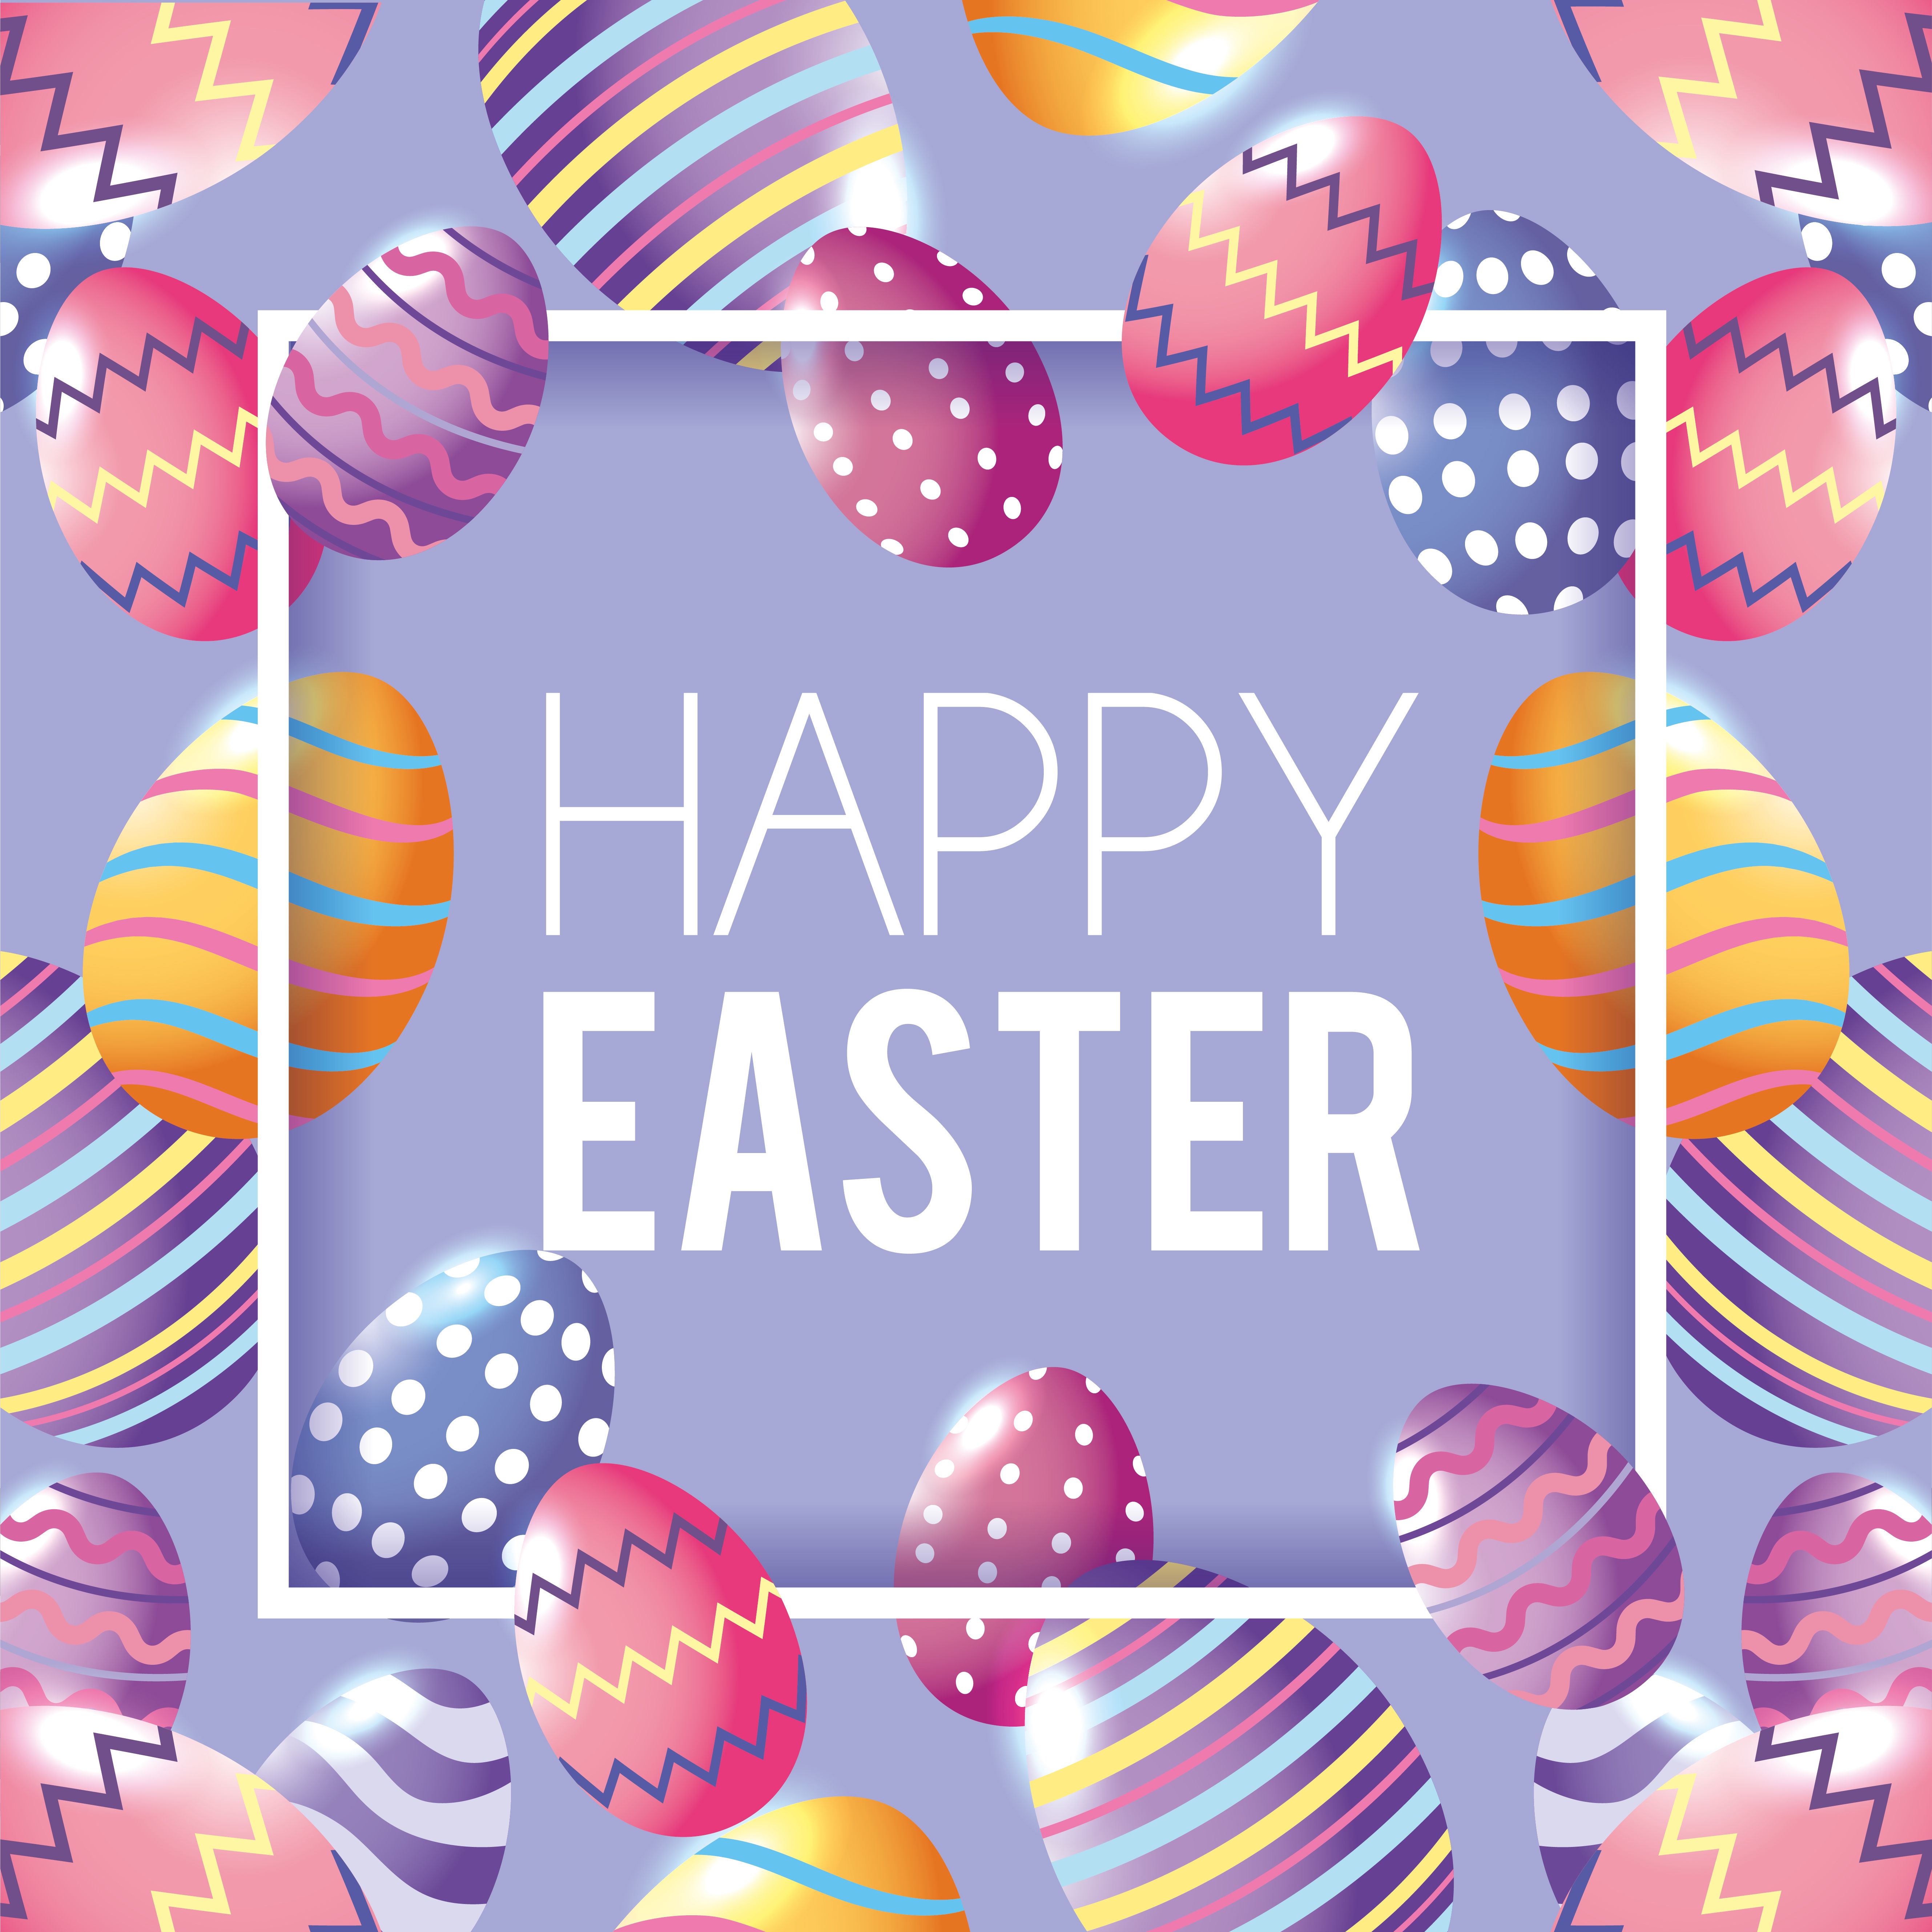 Happy Easter with easter eggs decoration background 690972 Free Vectors, Clipart Graphics & Vector Art